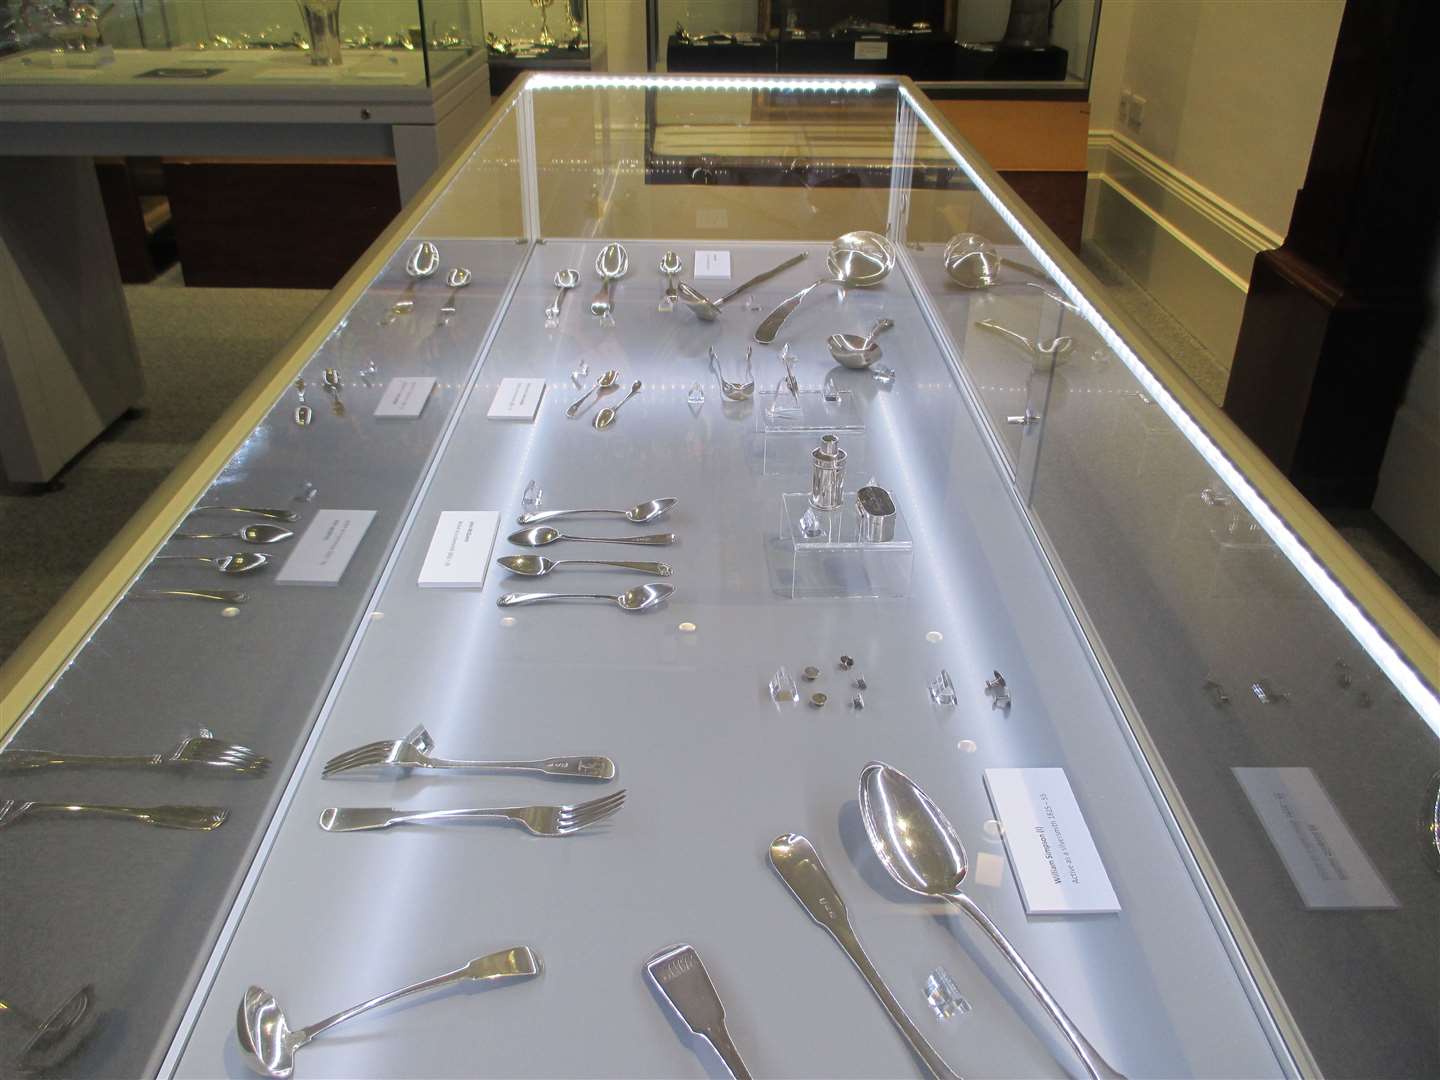 The new display cabinets are exhibiting the collection of silver connected to the area.